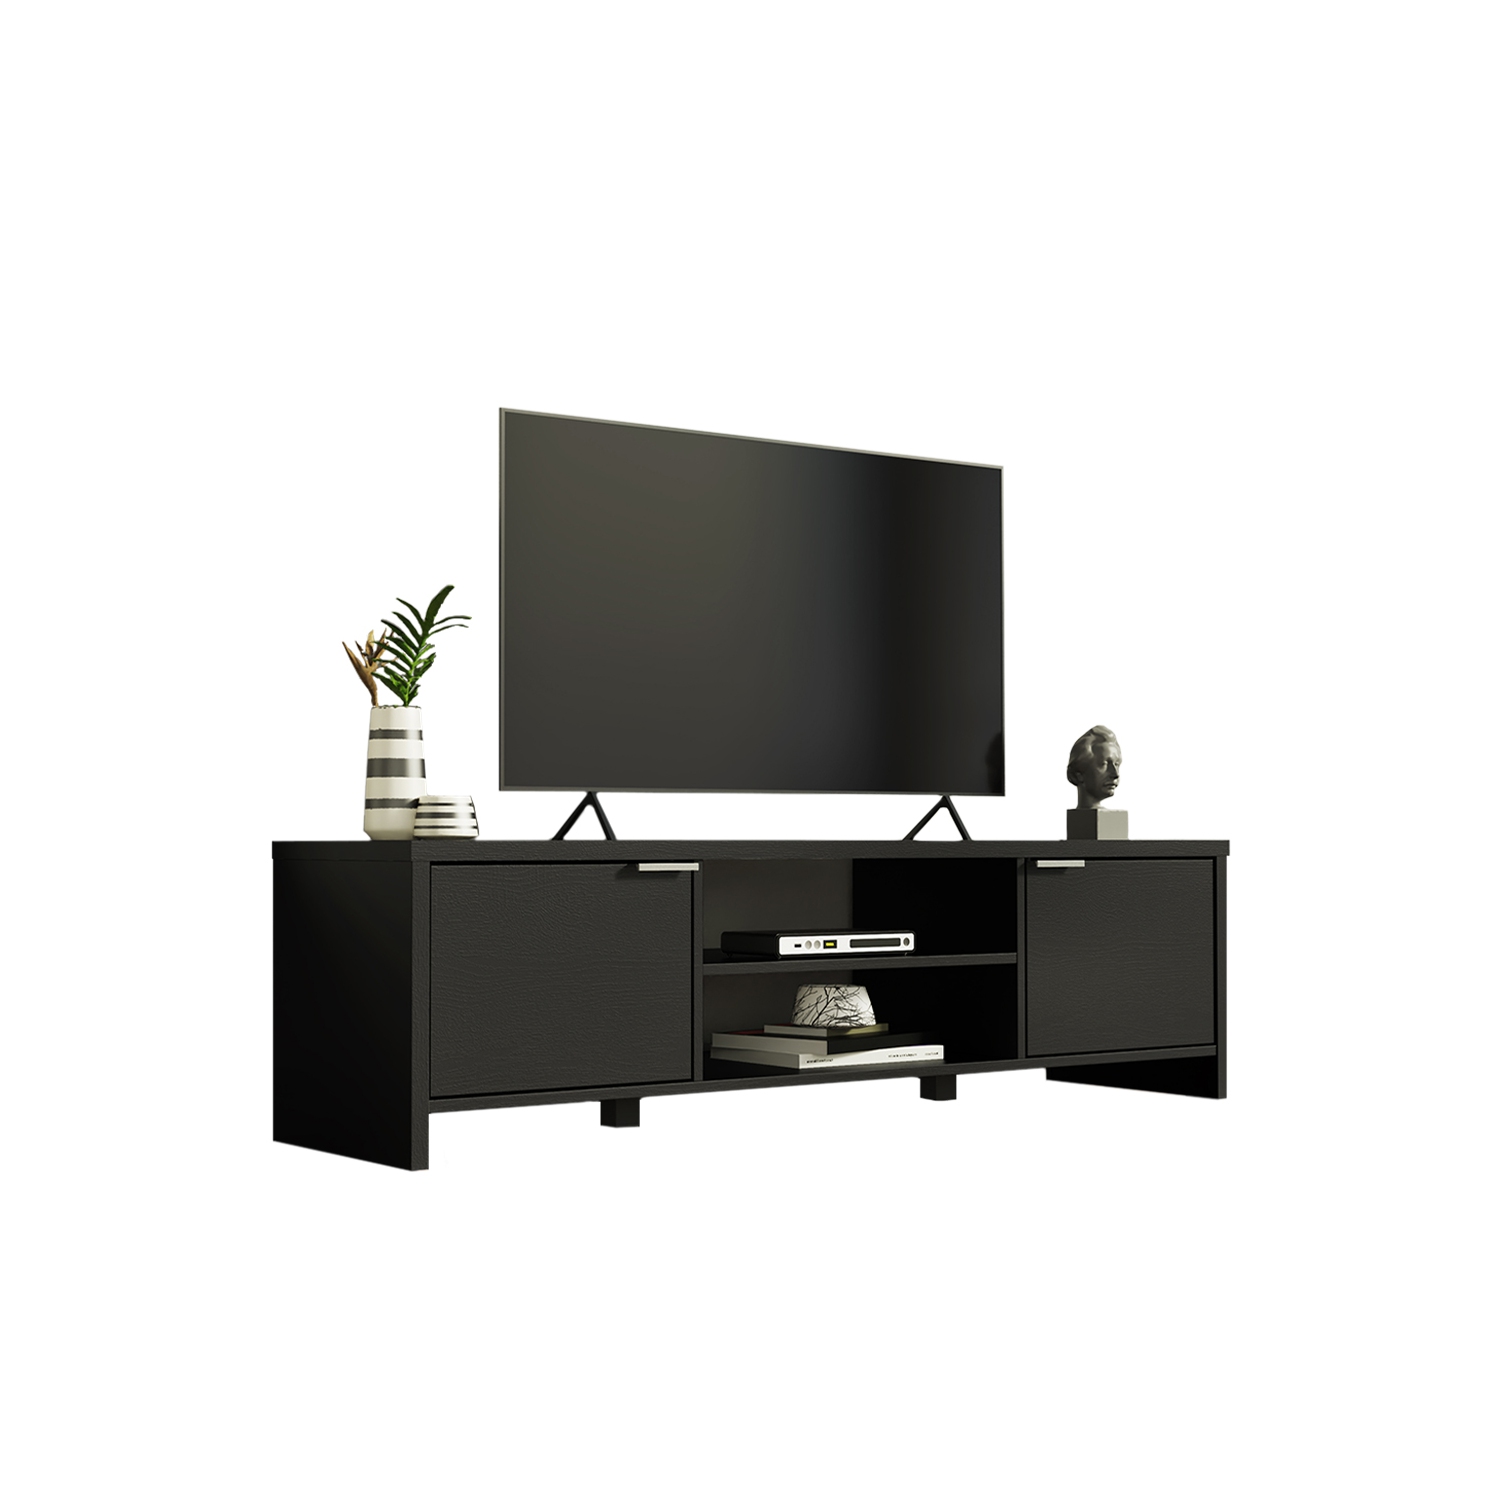 MADESA TV Stand with Storage Space and Cable Management, for TVs up to 65 Inches, Wood, 16” H x 15" D x 57” L - Black